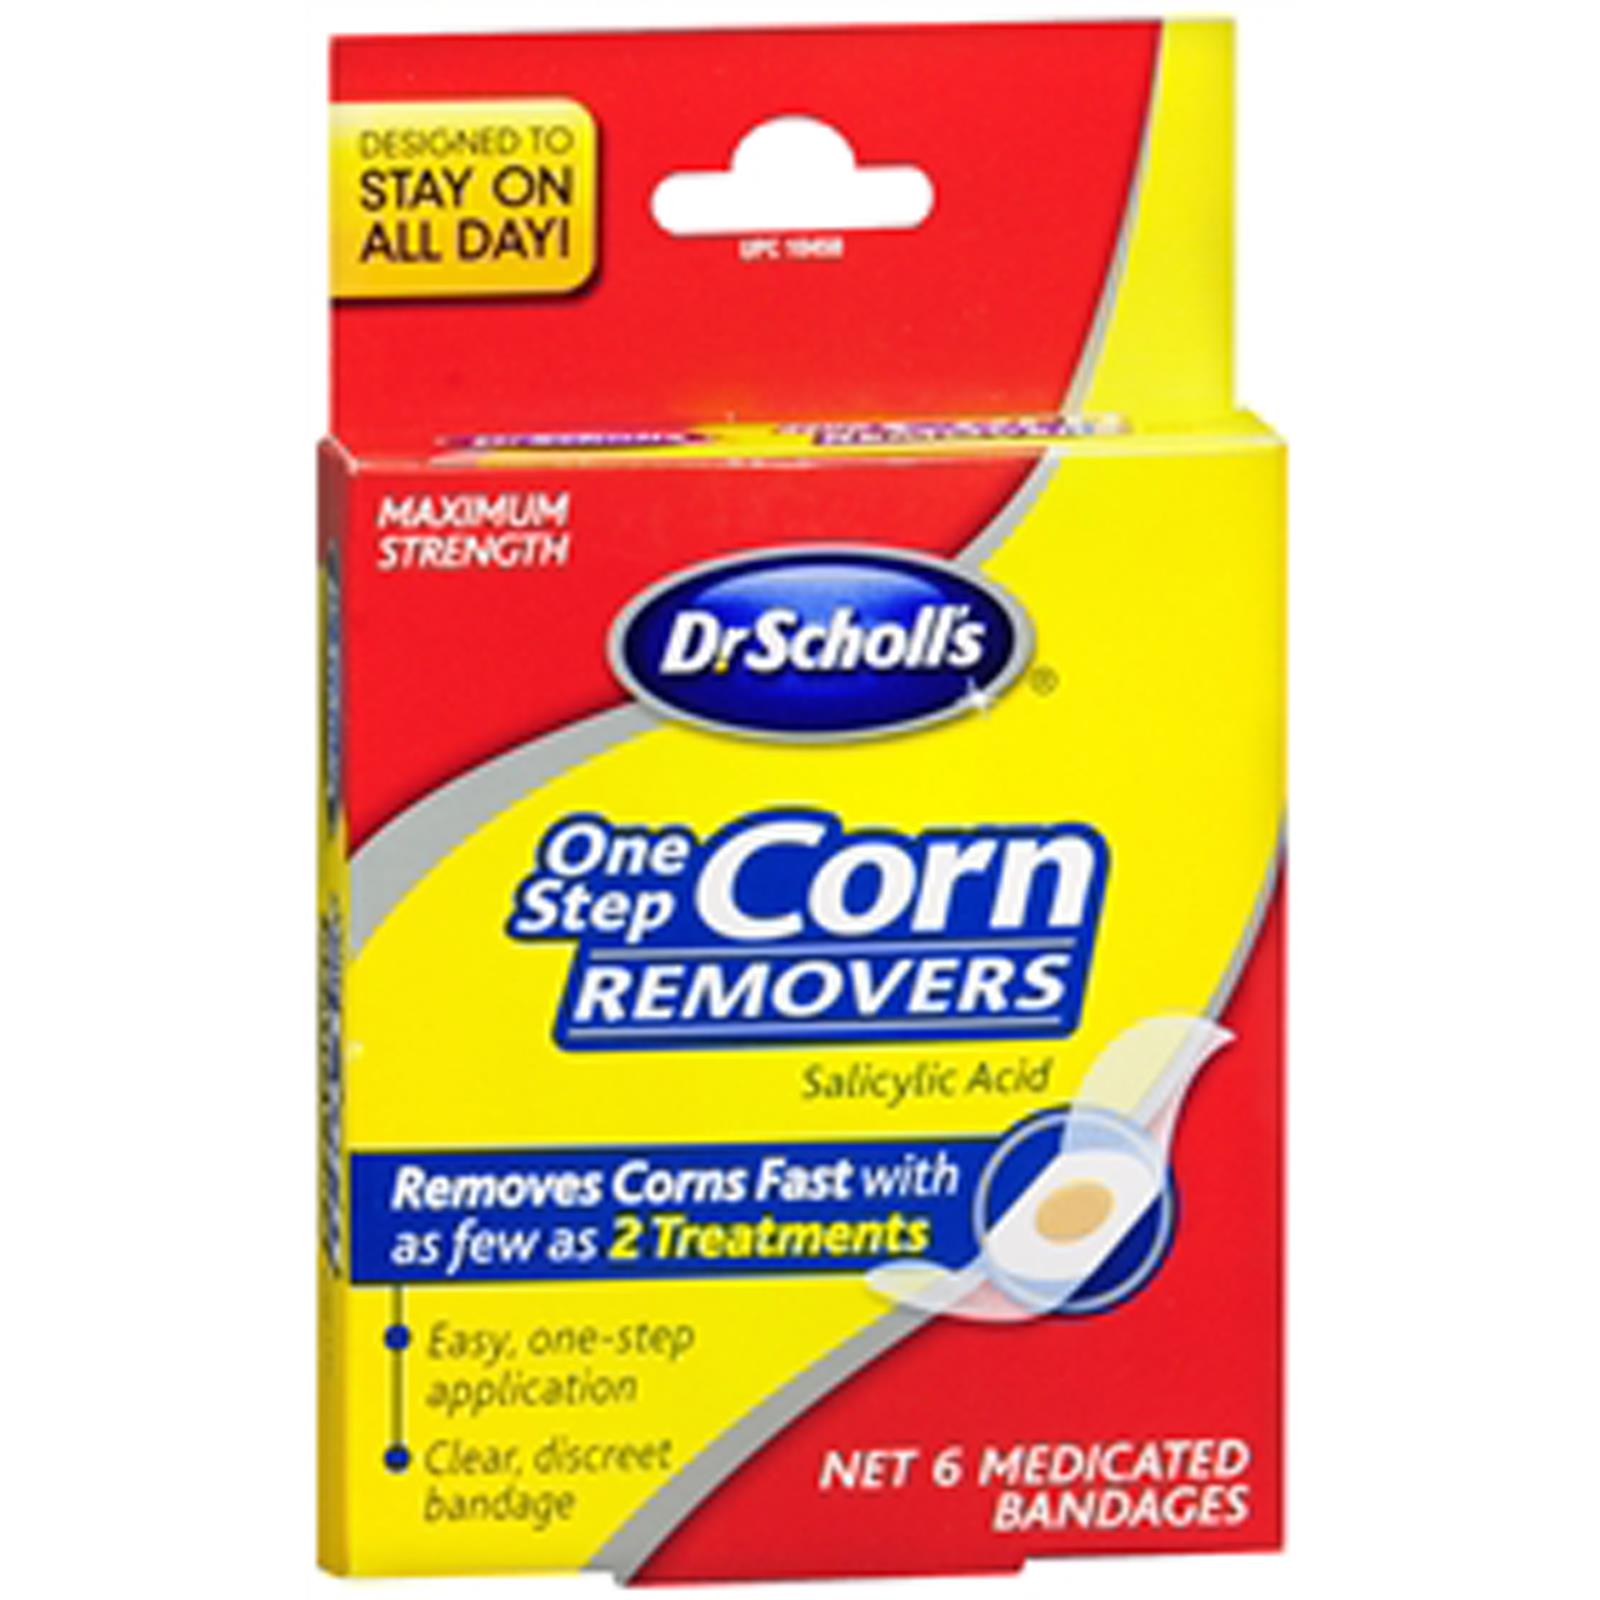 Dr. Scholl's One Step Corn Removers, Maximum Strength   6 pack